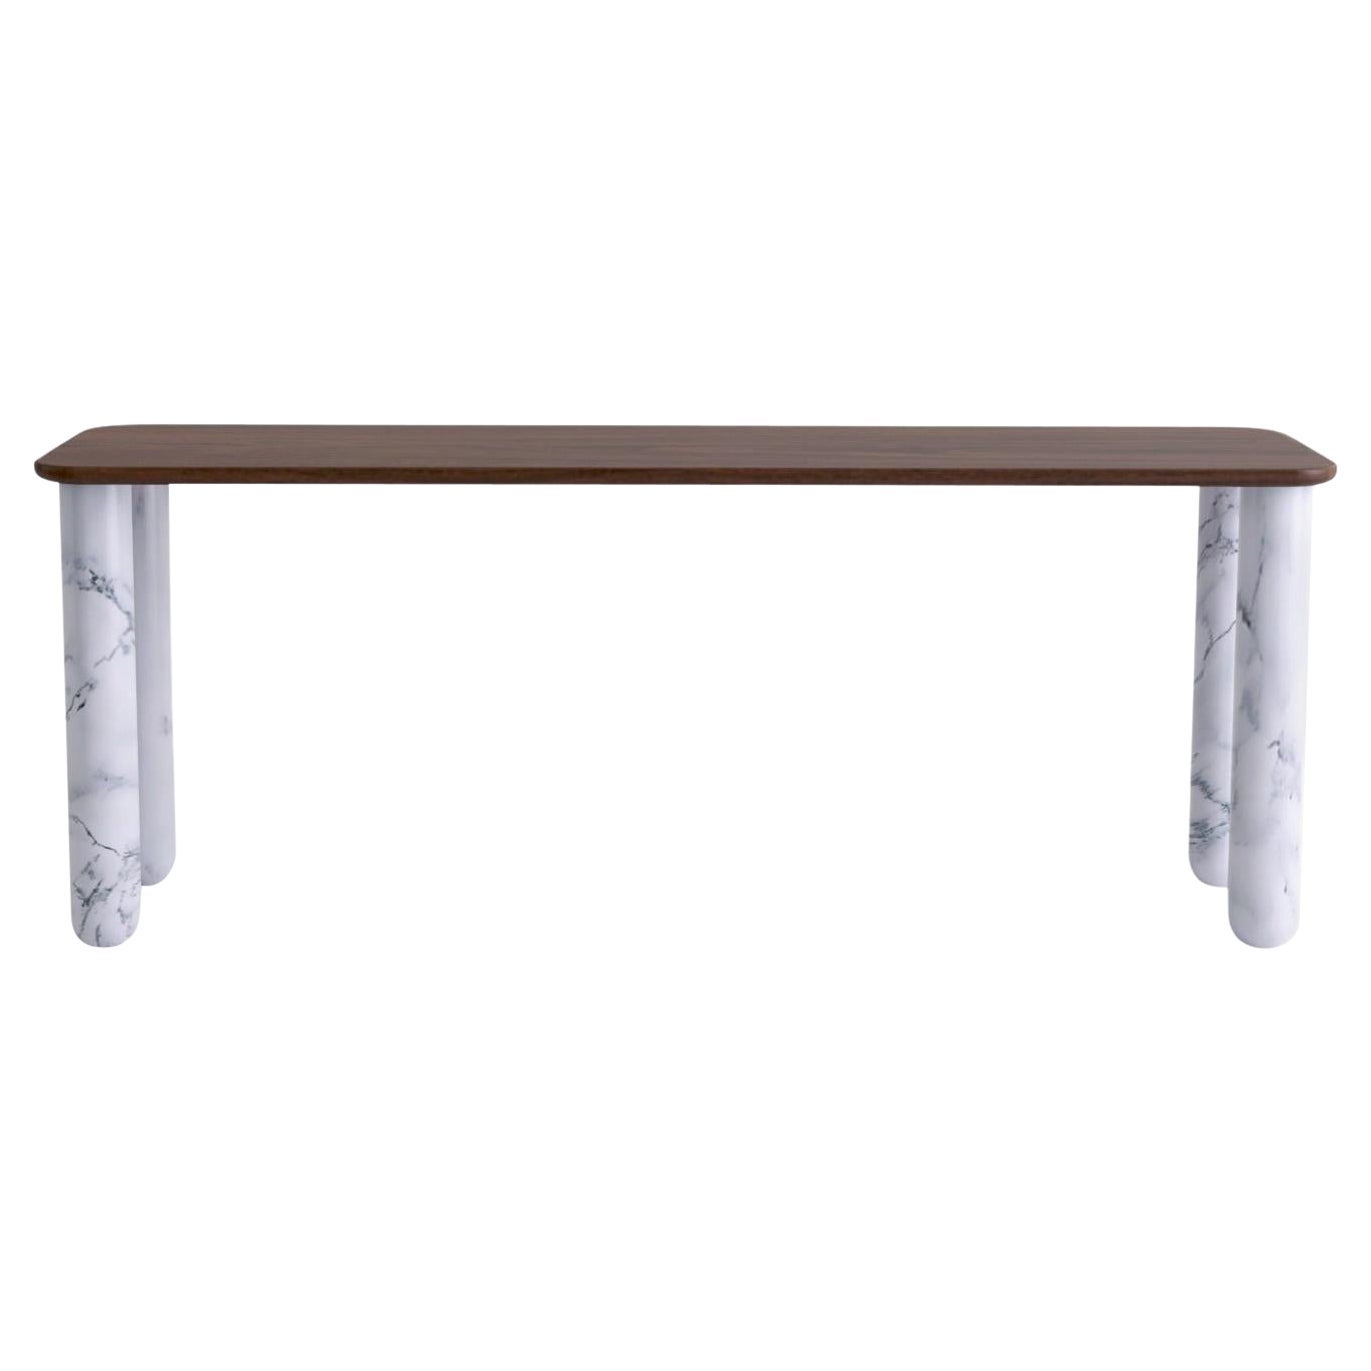 Large Walnut and White Marble "Sunday" Dining Table, Jean-Baptiste Souletie